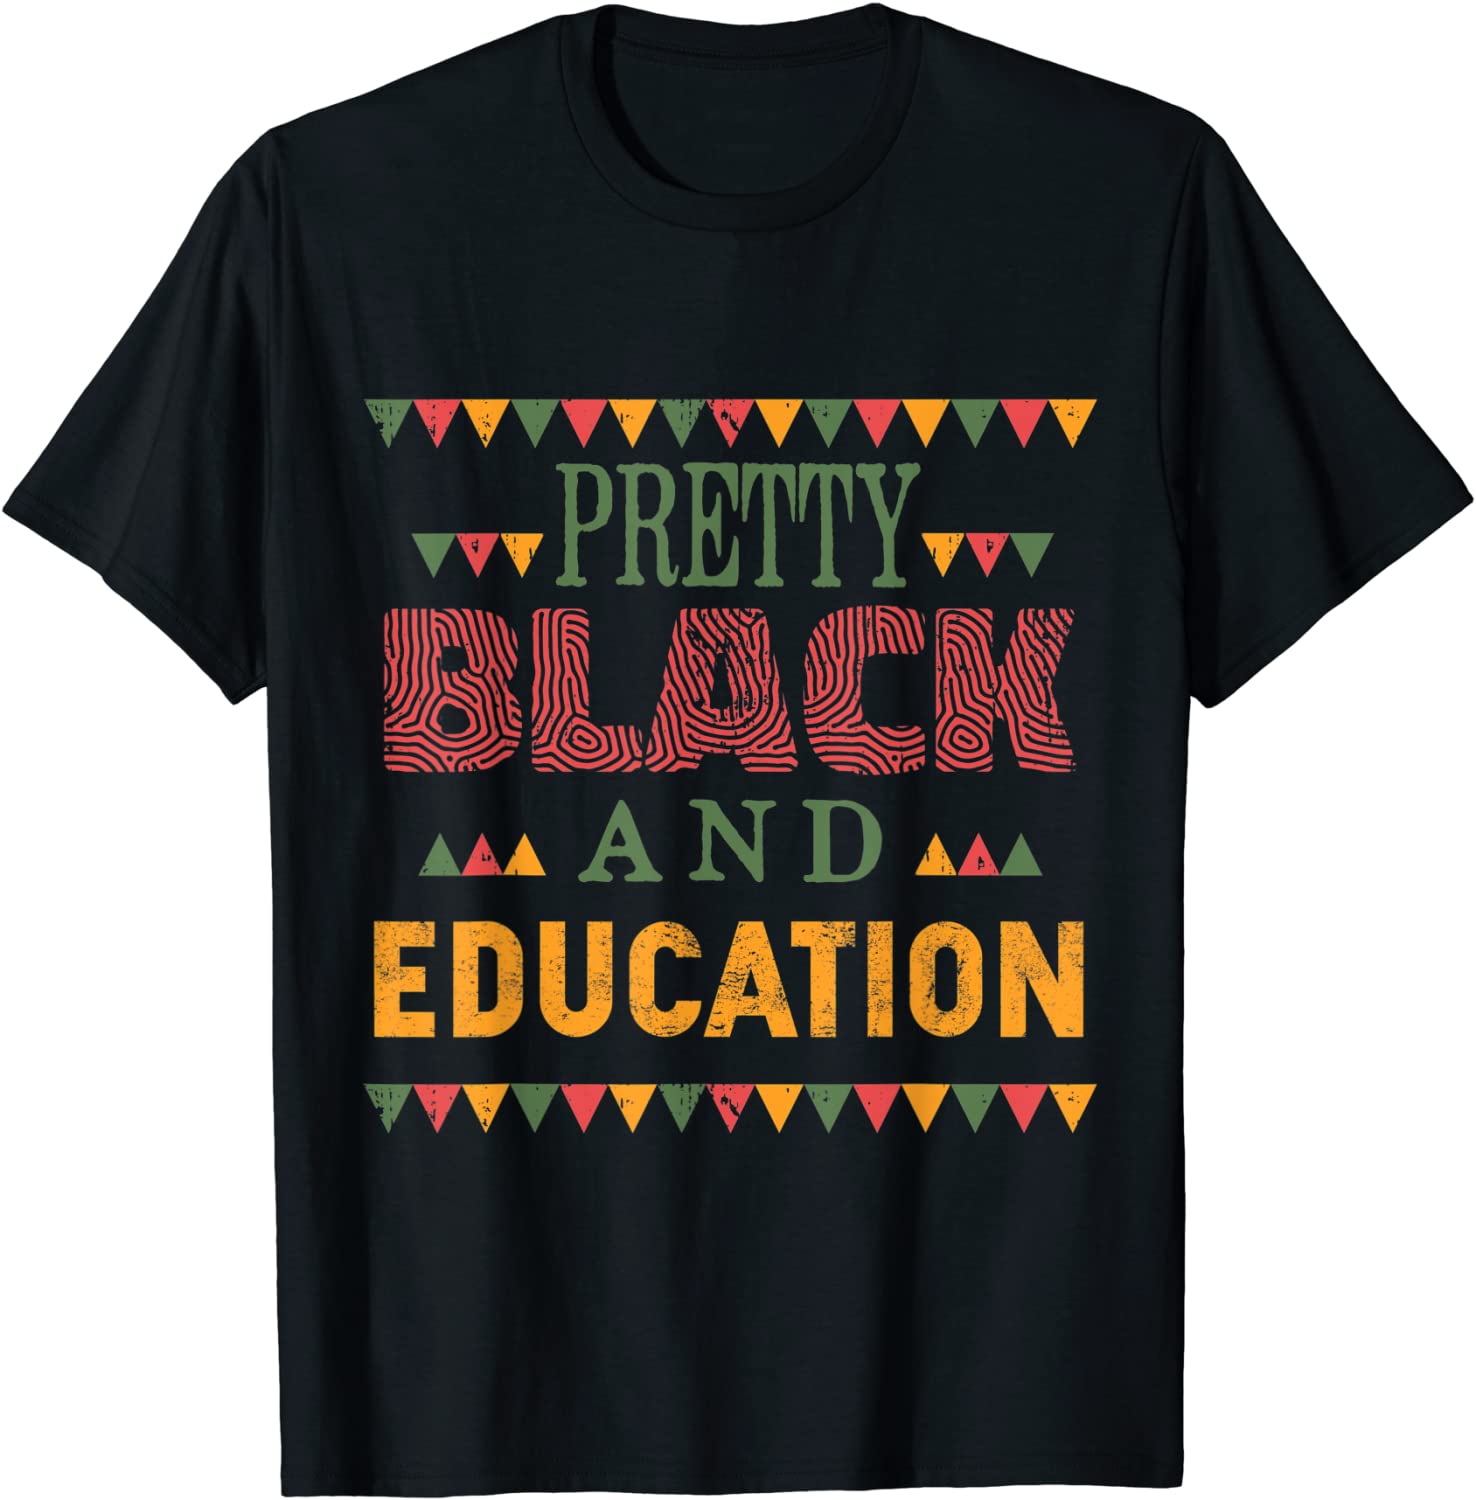 Pretty Black and Education African American History Month Tee Shirt ...